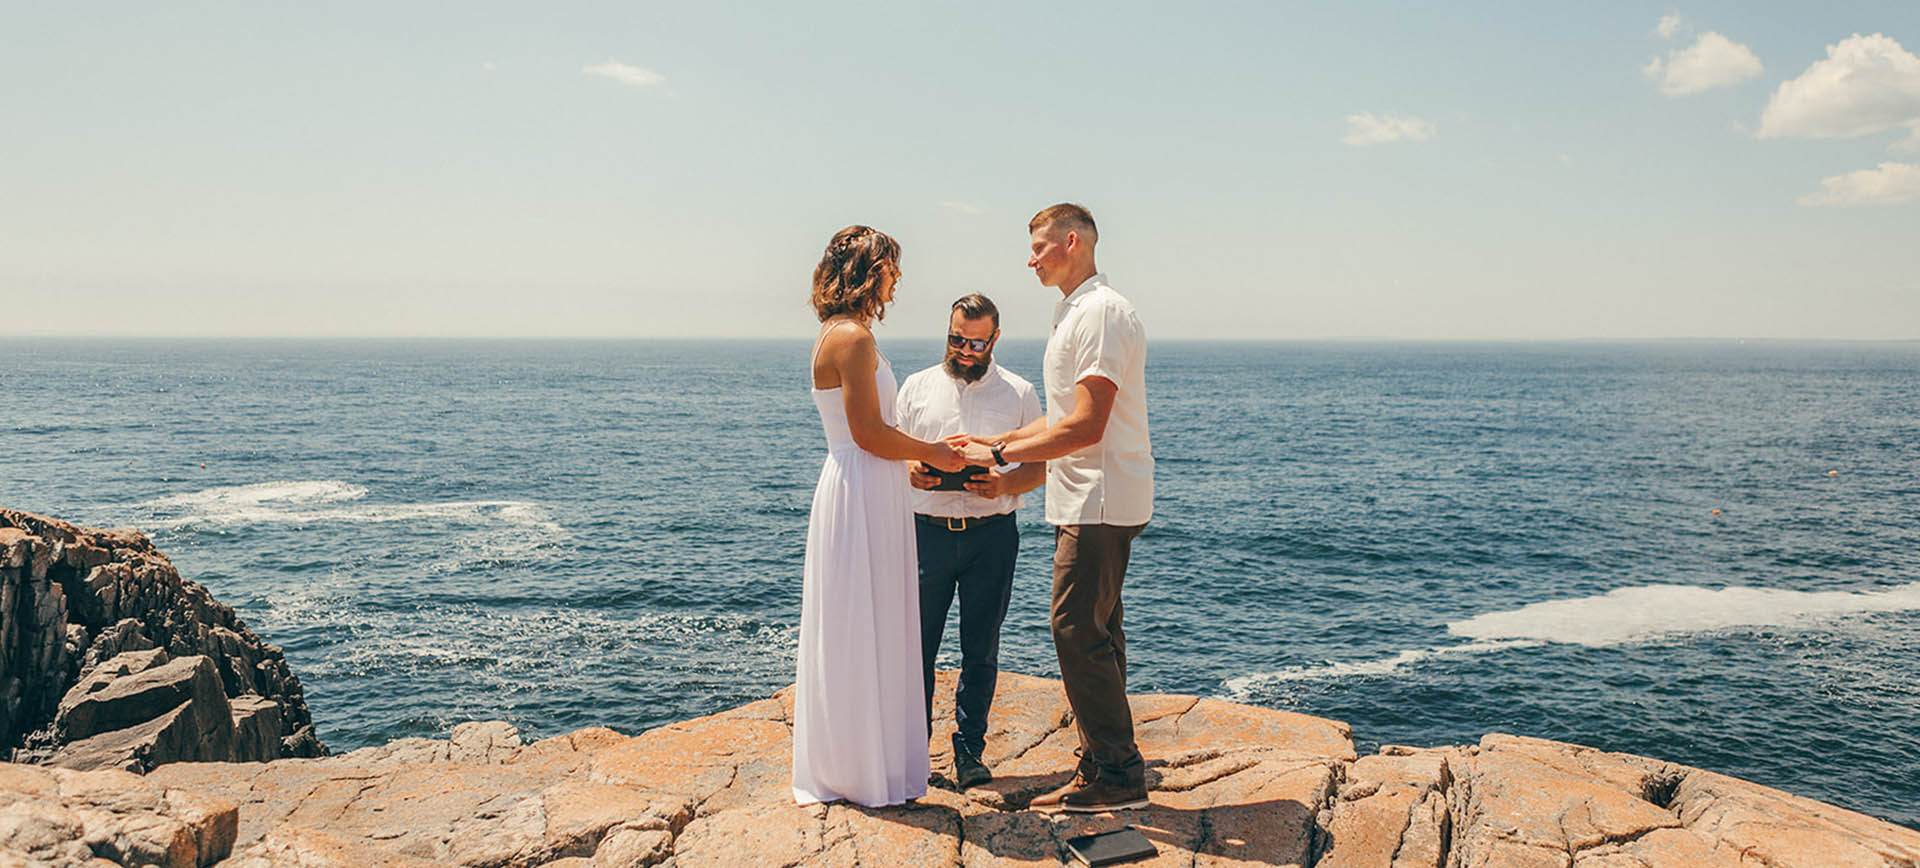 acadia national park wedding - couple booked maine elopement package at the beach